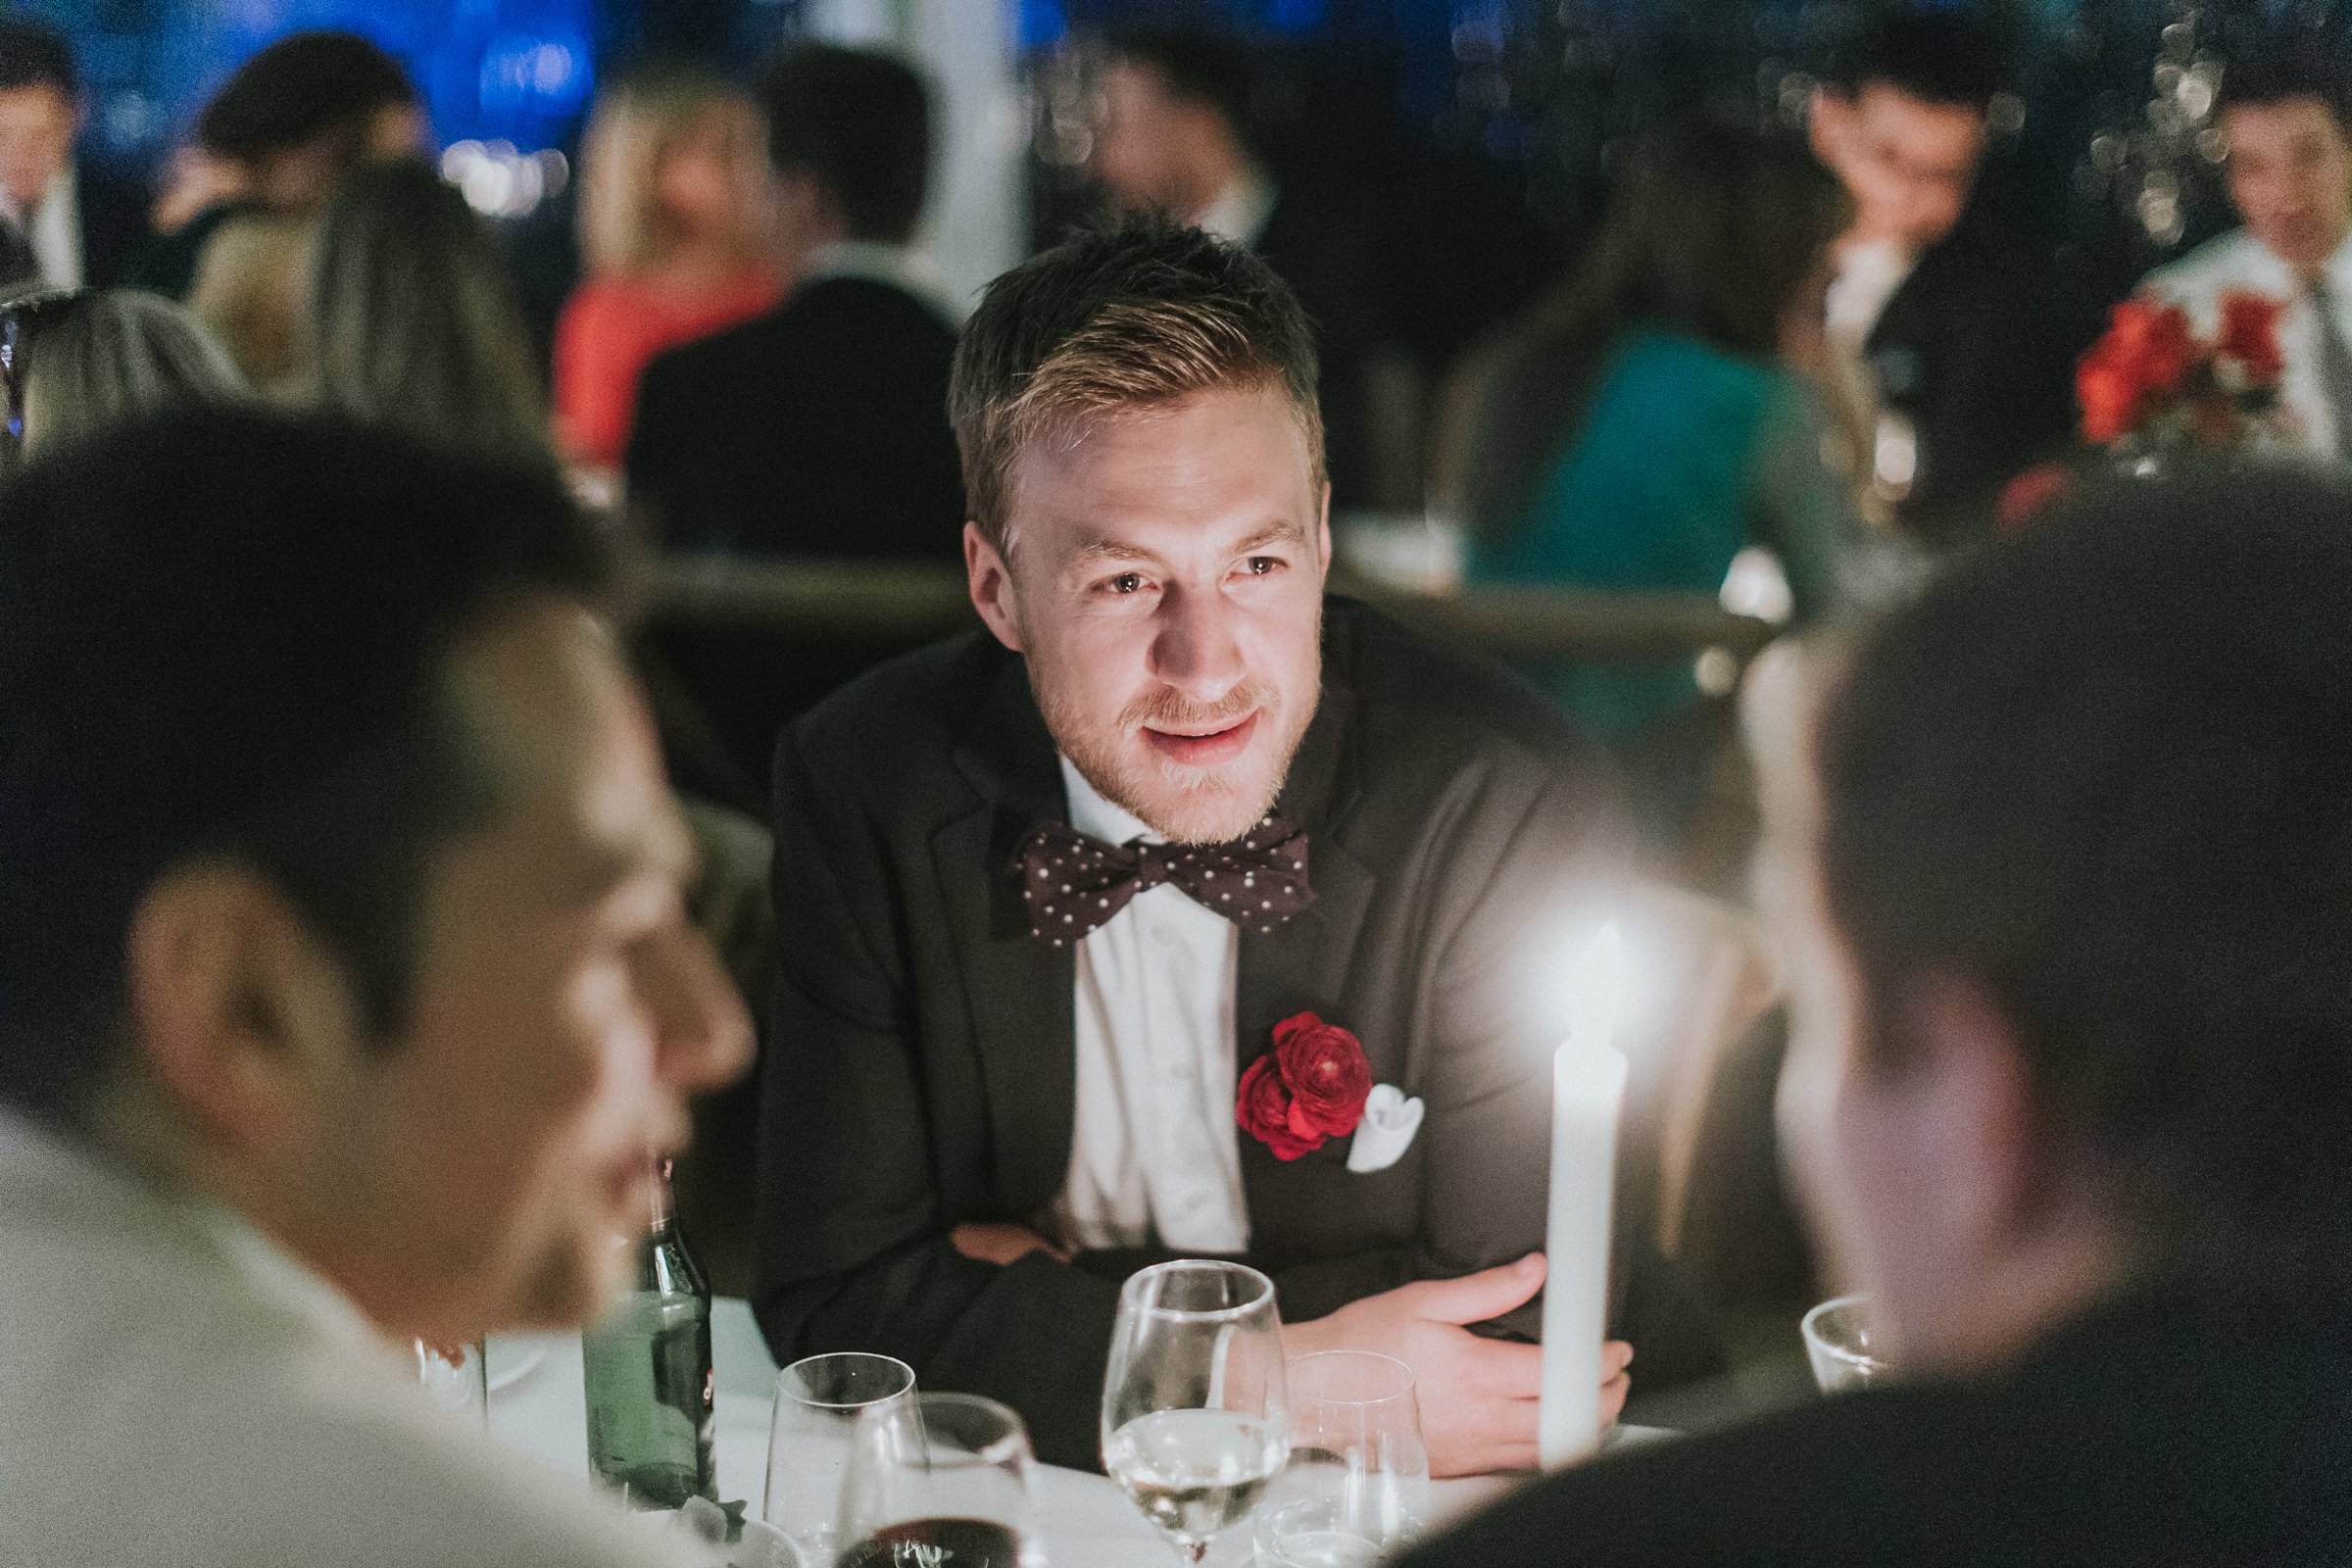 guests enjoying some quiet conversation by candlelight during marquee wedding reception in berry